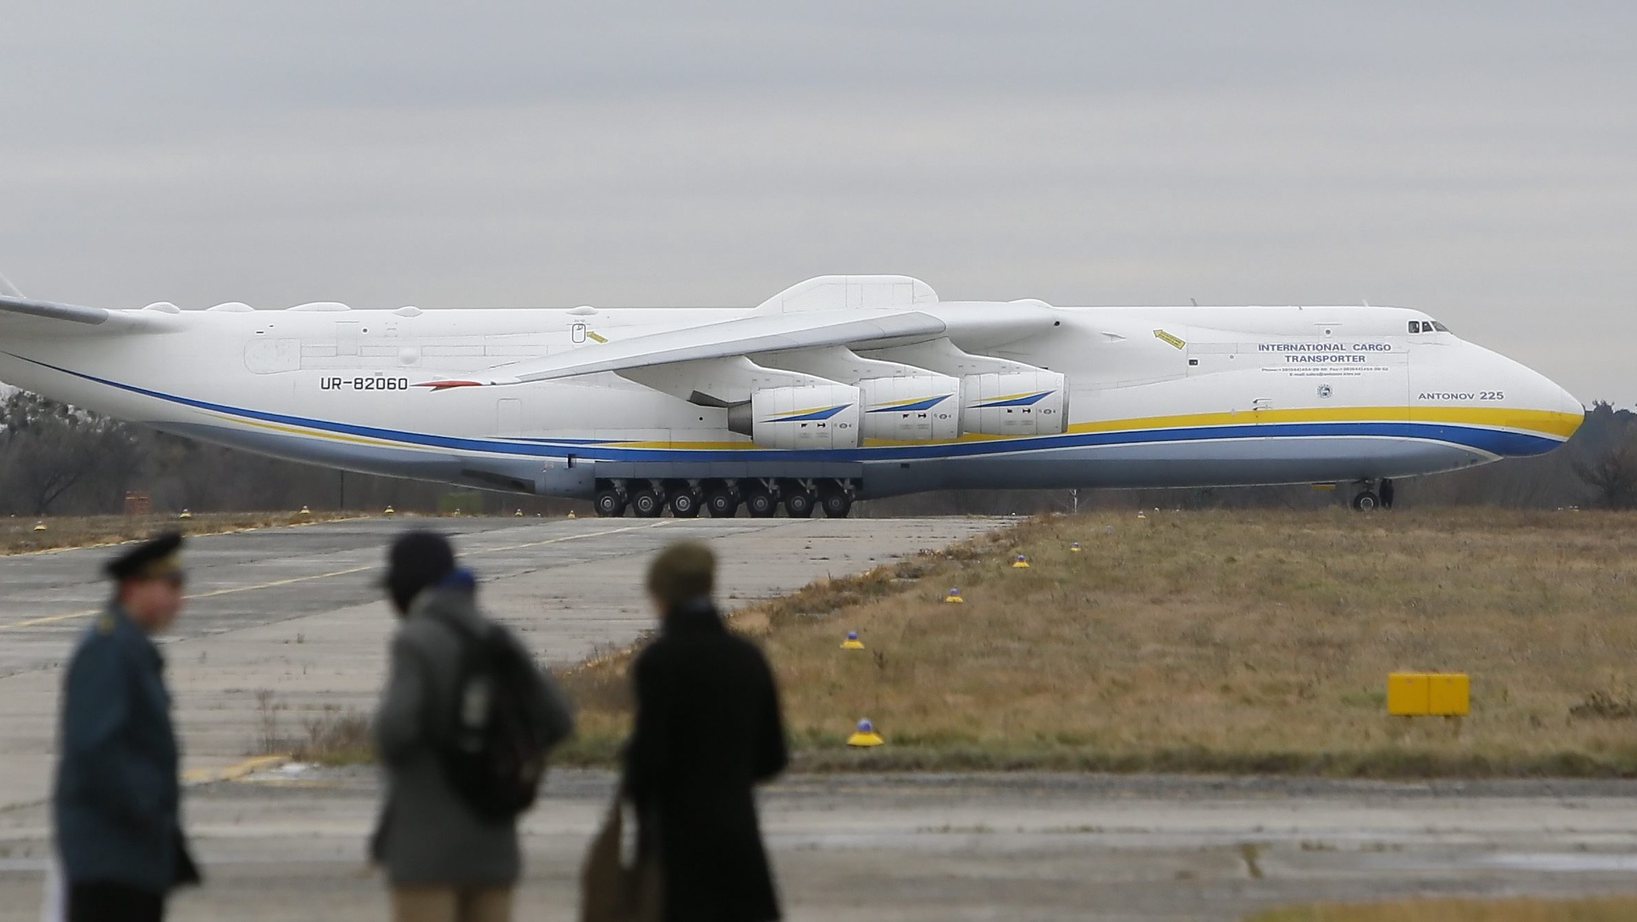 epa05625527 An Ukrainian Antonov An-225 &#039;Mriya&#039; (Dream) aircraft is prepared for takeoff from the Gostomel airport, near Kiev, Ukraine, 10 November 2016. The giant transport plane will pick up a cargo in Germany city of Leipzig for further commercial flight. The Antonov An-225 &#039;Mriya&#039; is a strategic airlift cargo aircraft which was originally designed in the 1980s in by the then Soviet Union&#039;s Antonov Design Bureau. Antonov An-225 aircraft, the only flying plane of its kind and longest and heaviest airplane ever built, is powered by six engines and can take a cargo with a maximum weight of 640 tons.  EPA/SERGEY DOLZHENKO